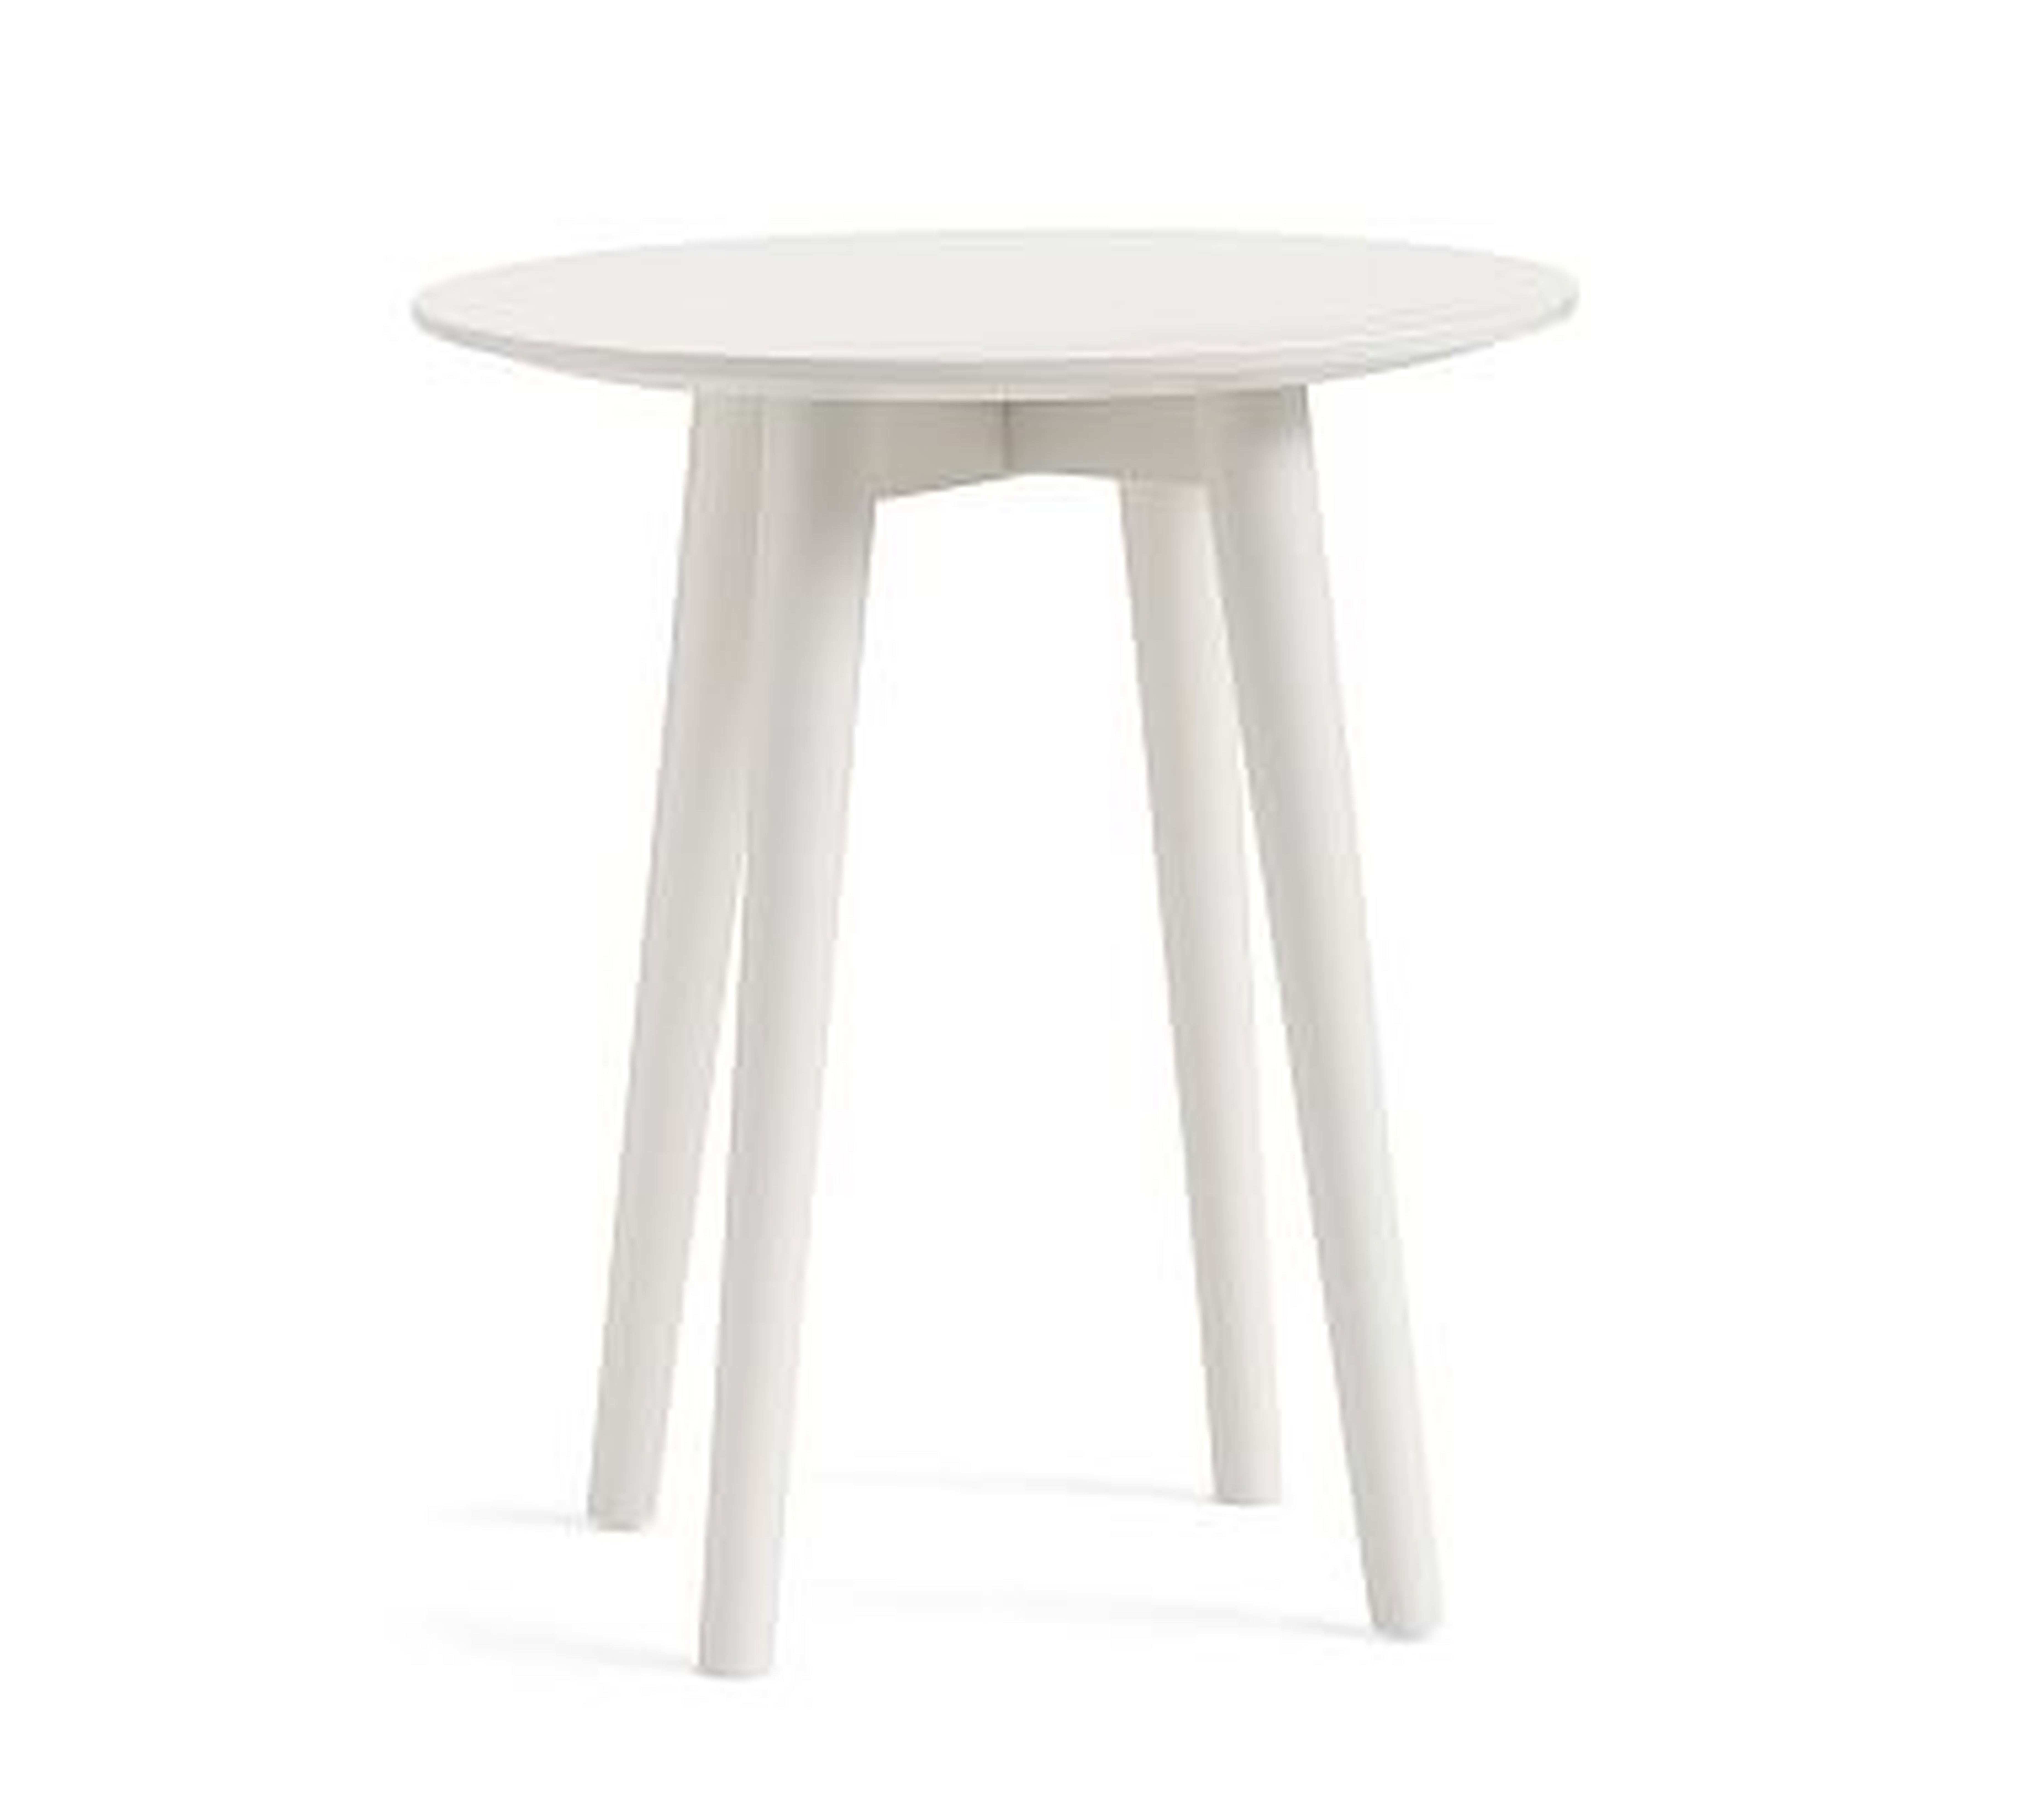 Modern Spindle Side Table, Simply White, UPS Delivery - Pottery Barn Kids